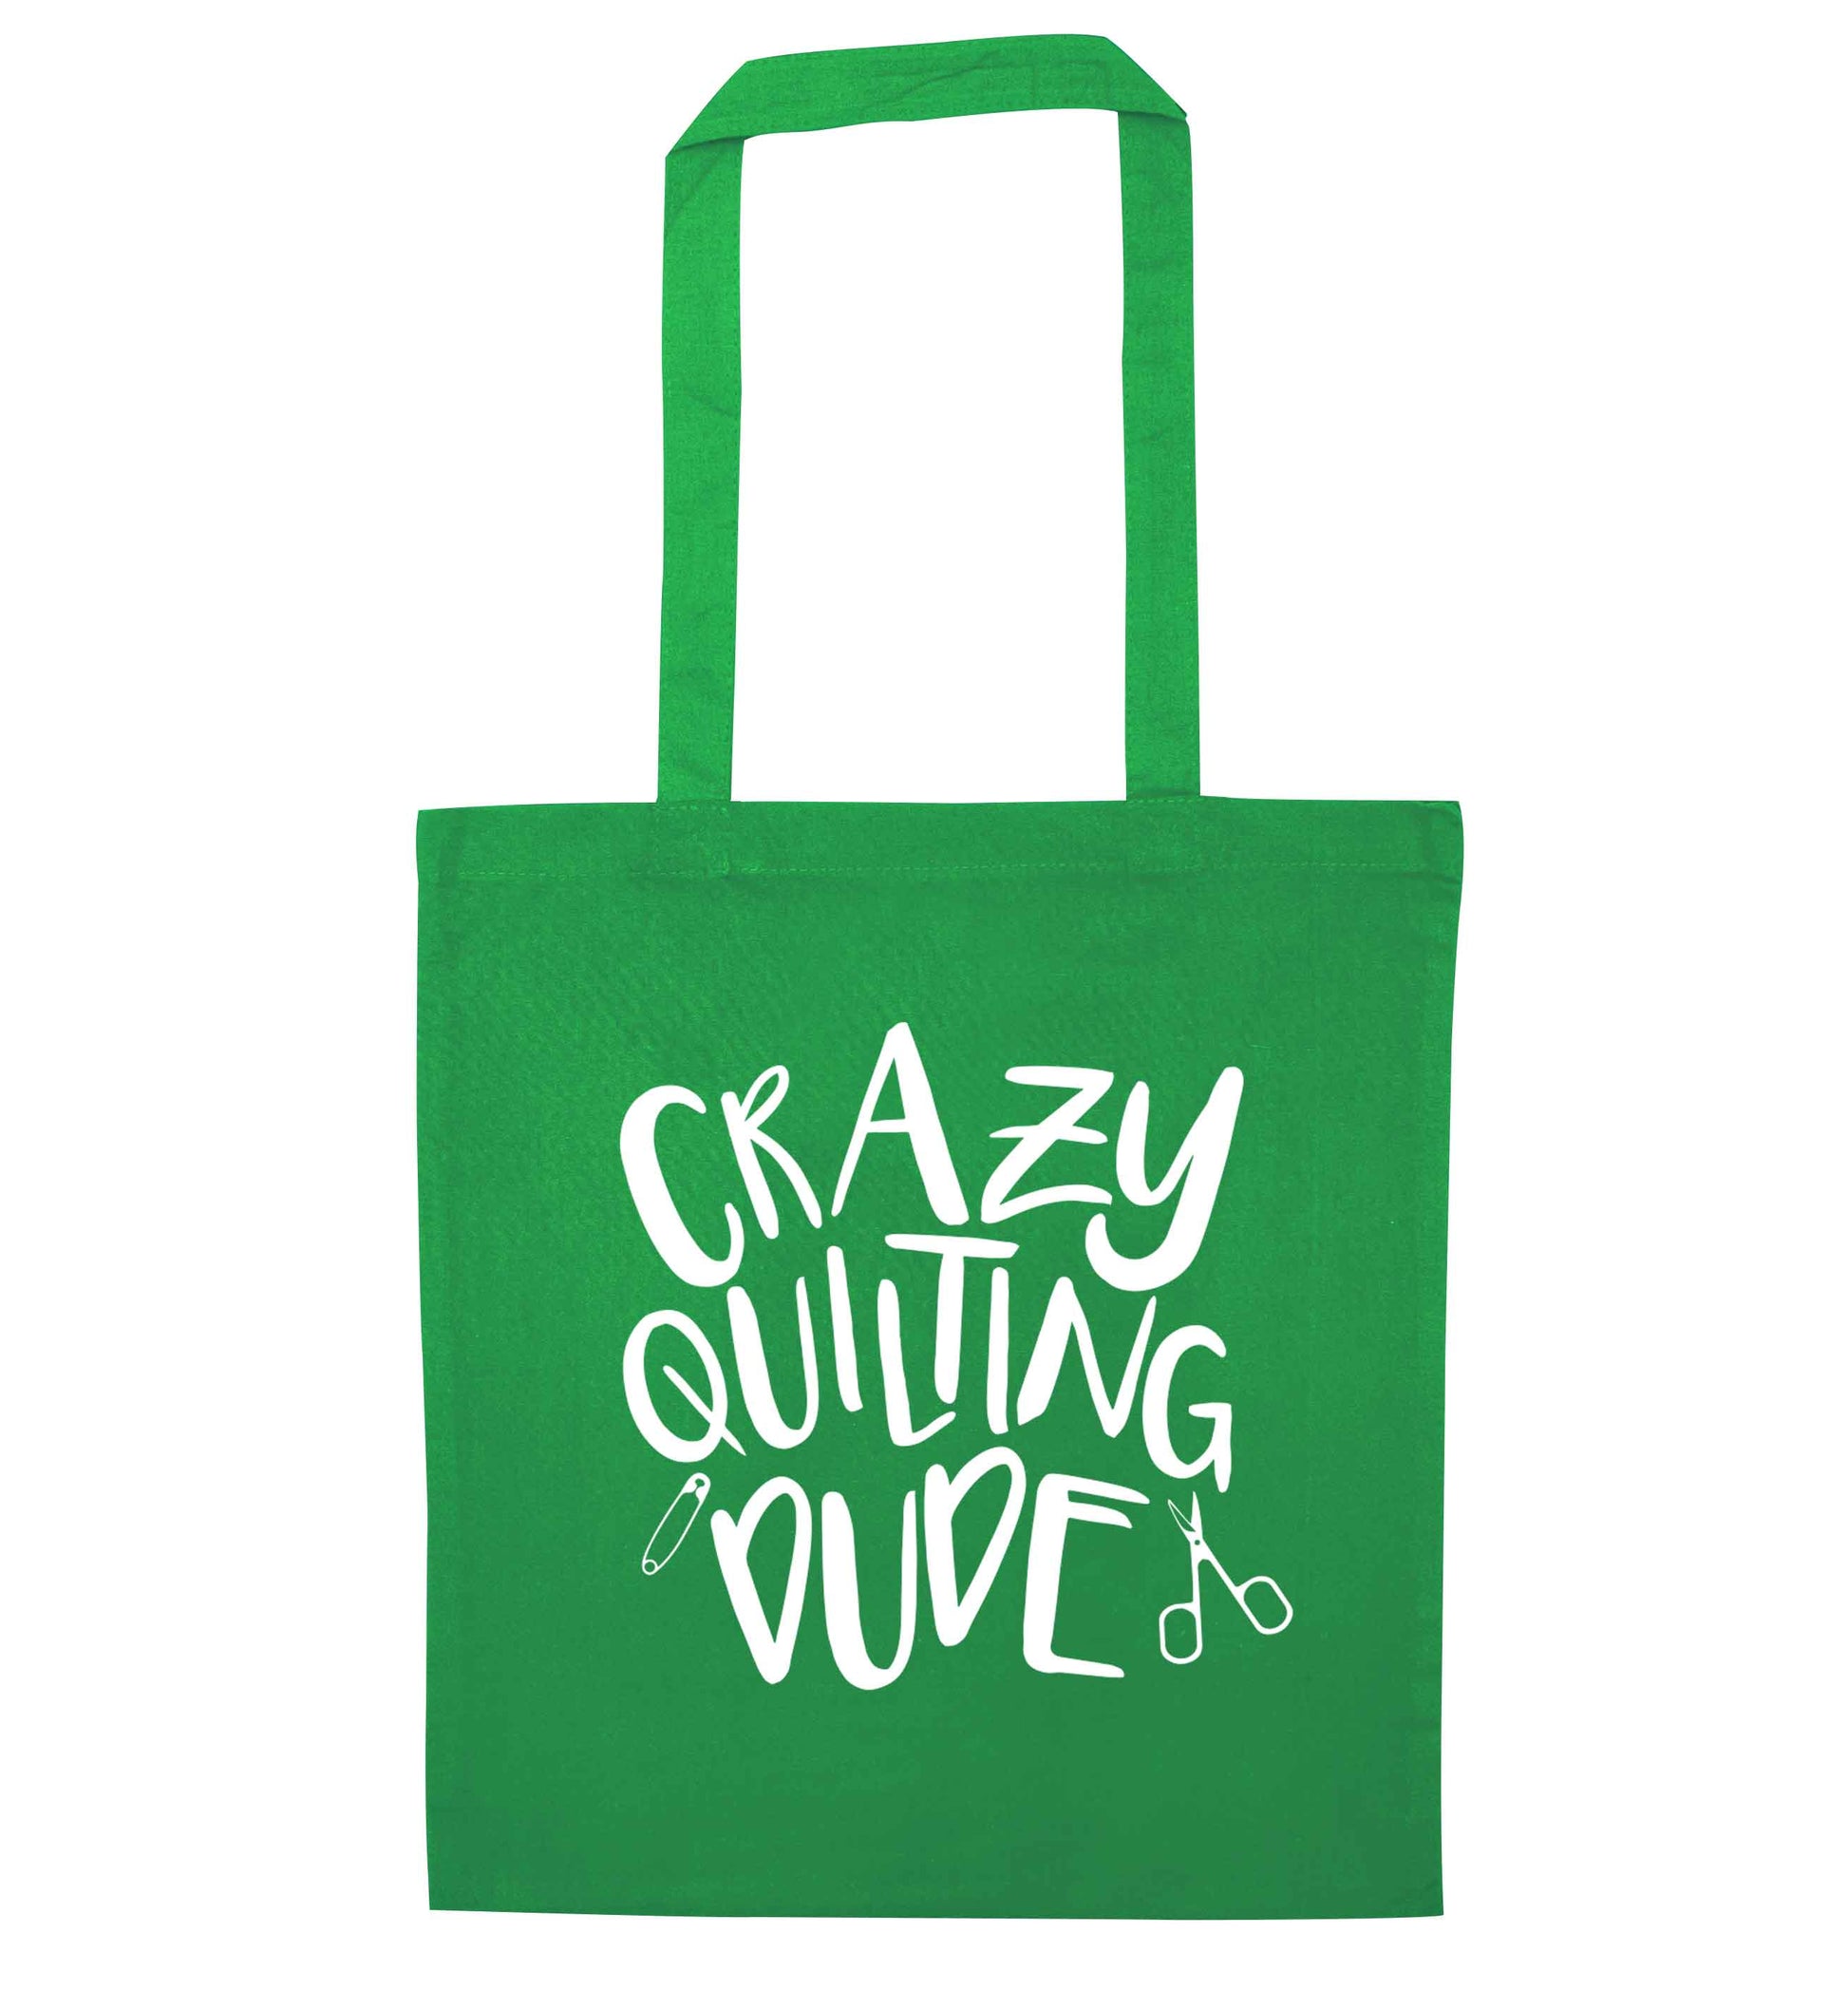 Crazy quilting dude green tote bag